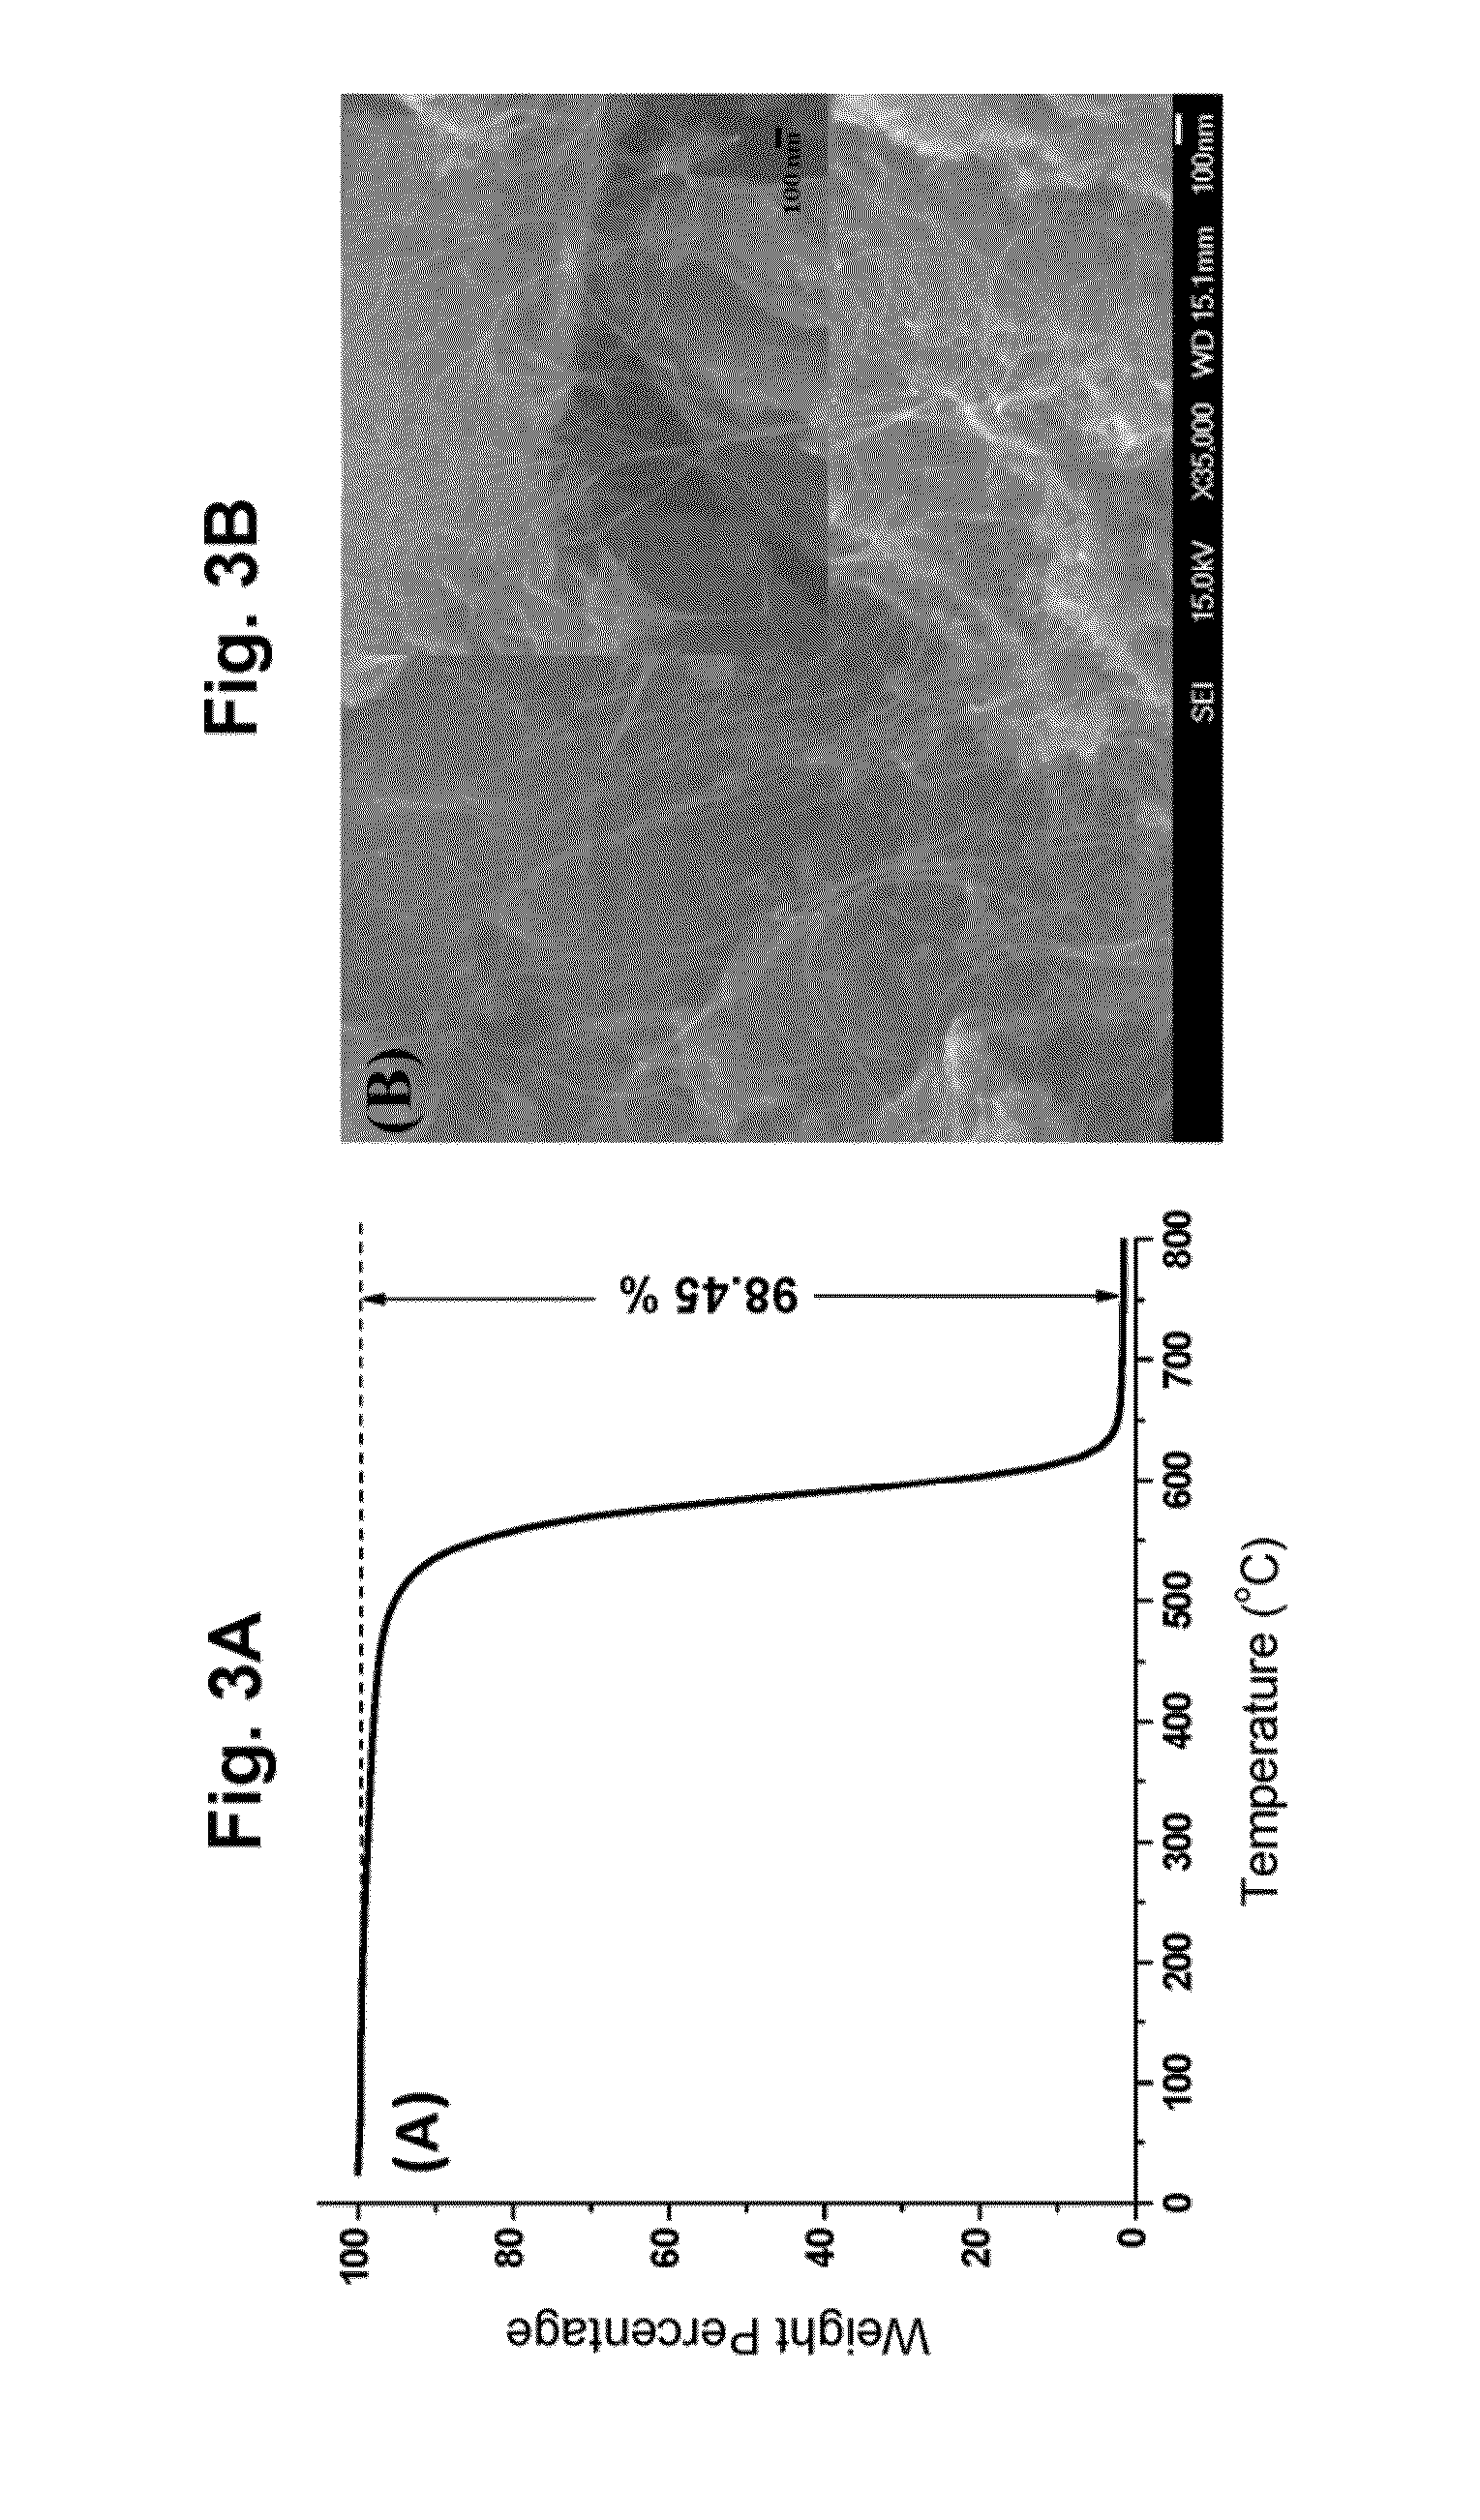 Anti-cancer nanoparticle compositions and methods of use